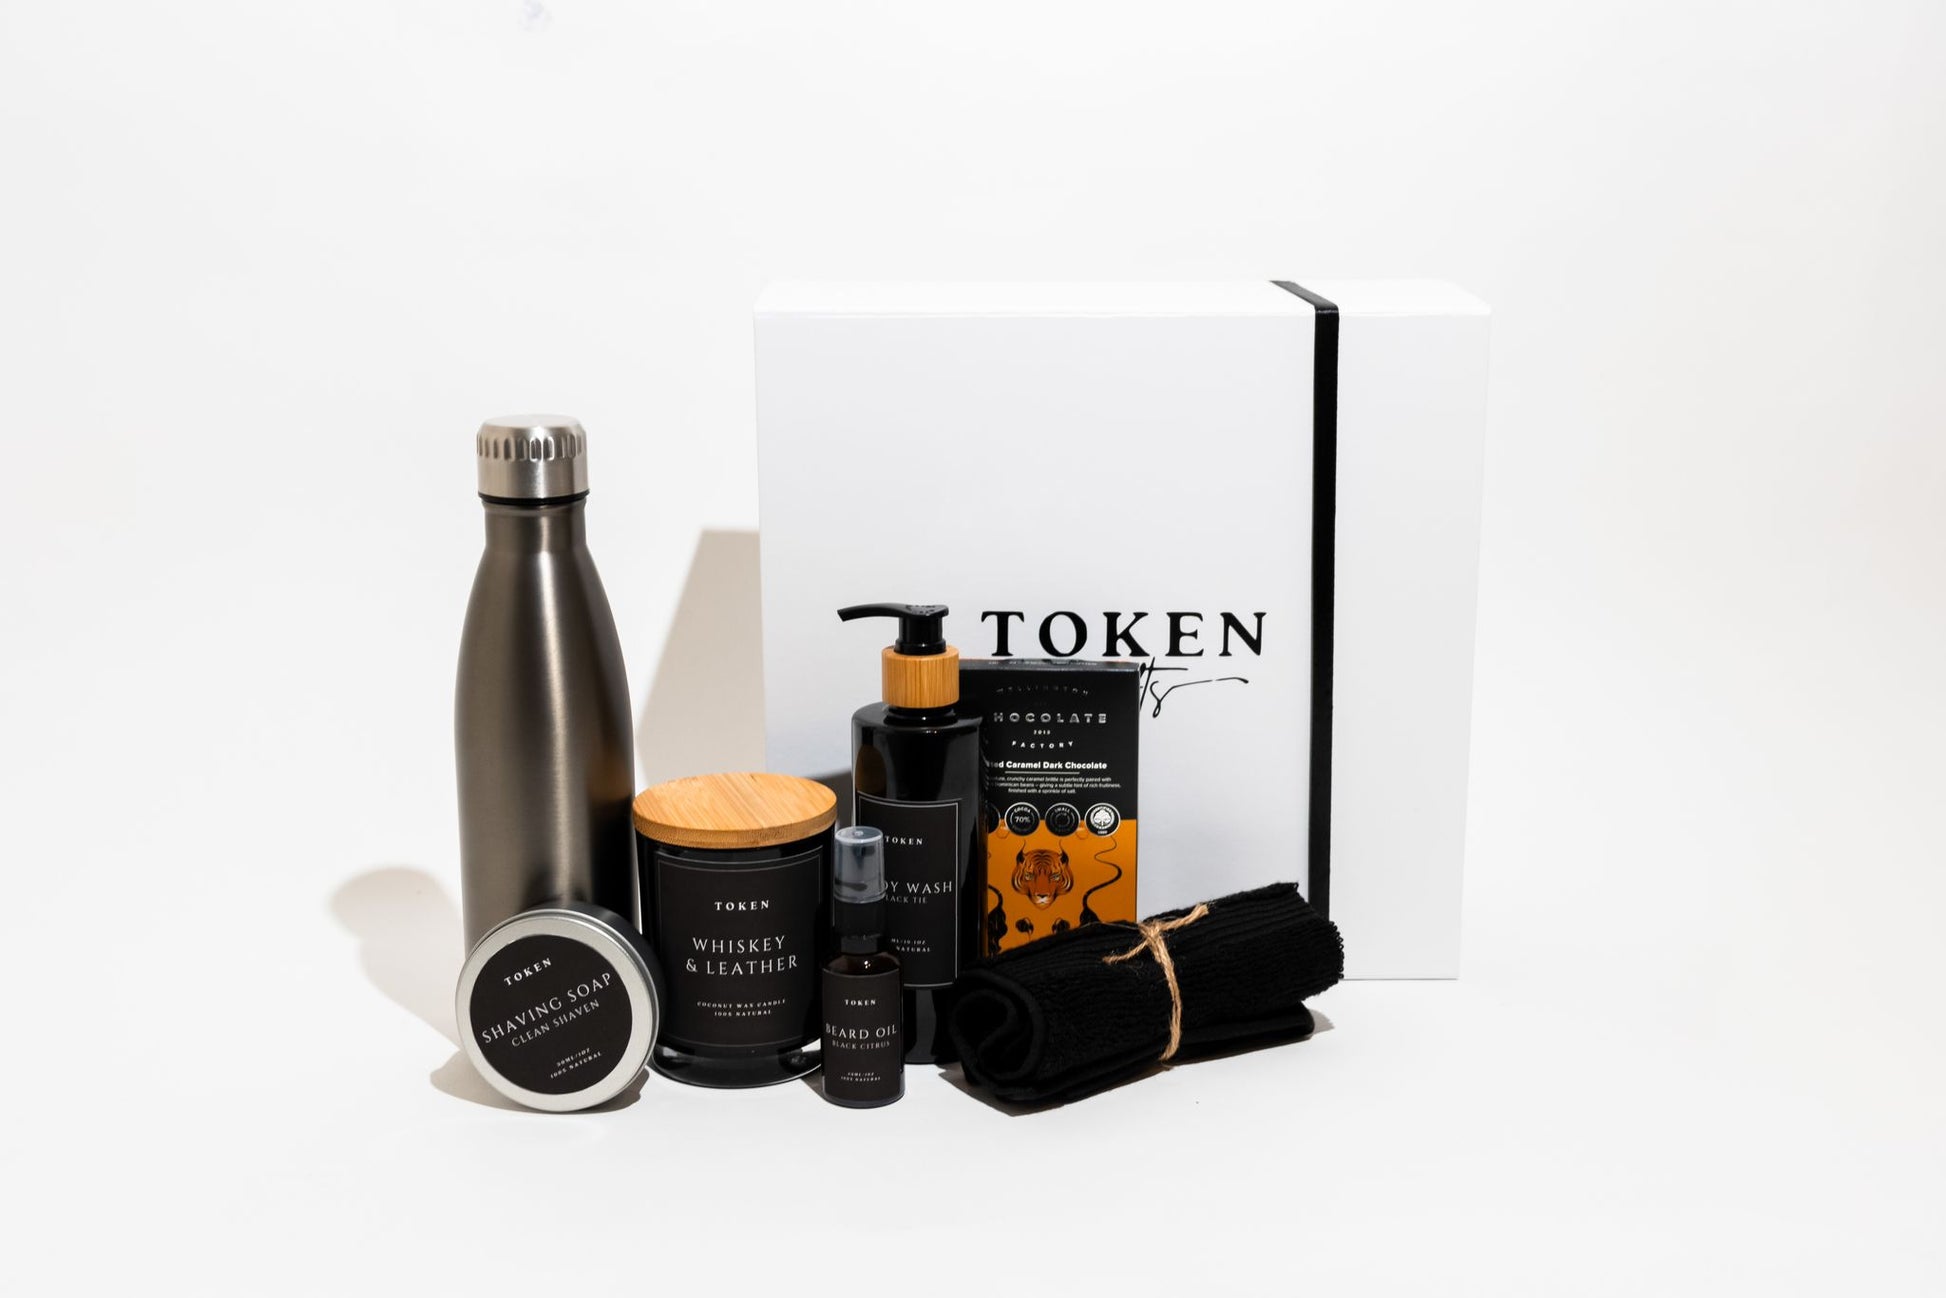 Mens Gift Box. Includes: Drink Bottle, Shaving Soap, Body Wash, Candle, Beard Oil, Face Cloth, Chocolate